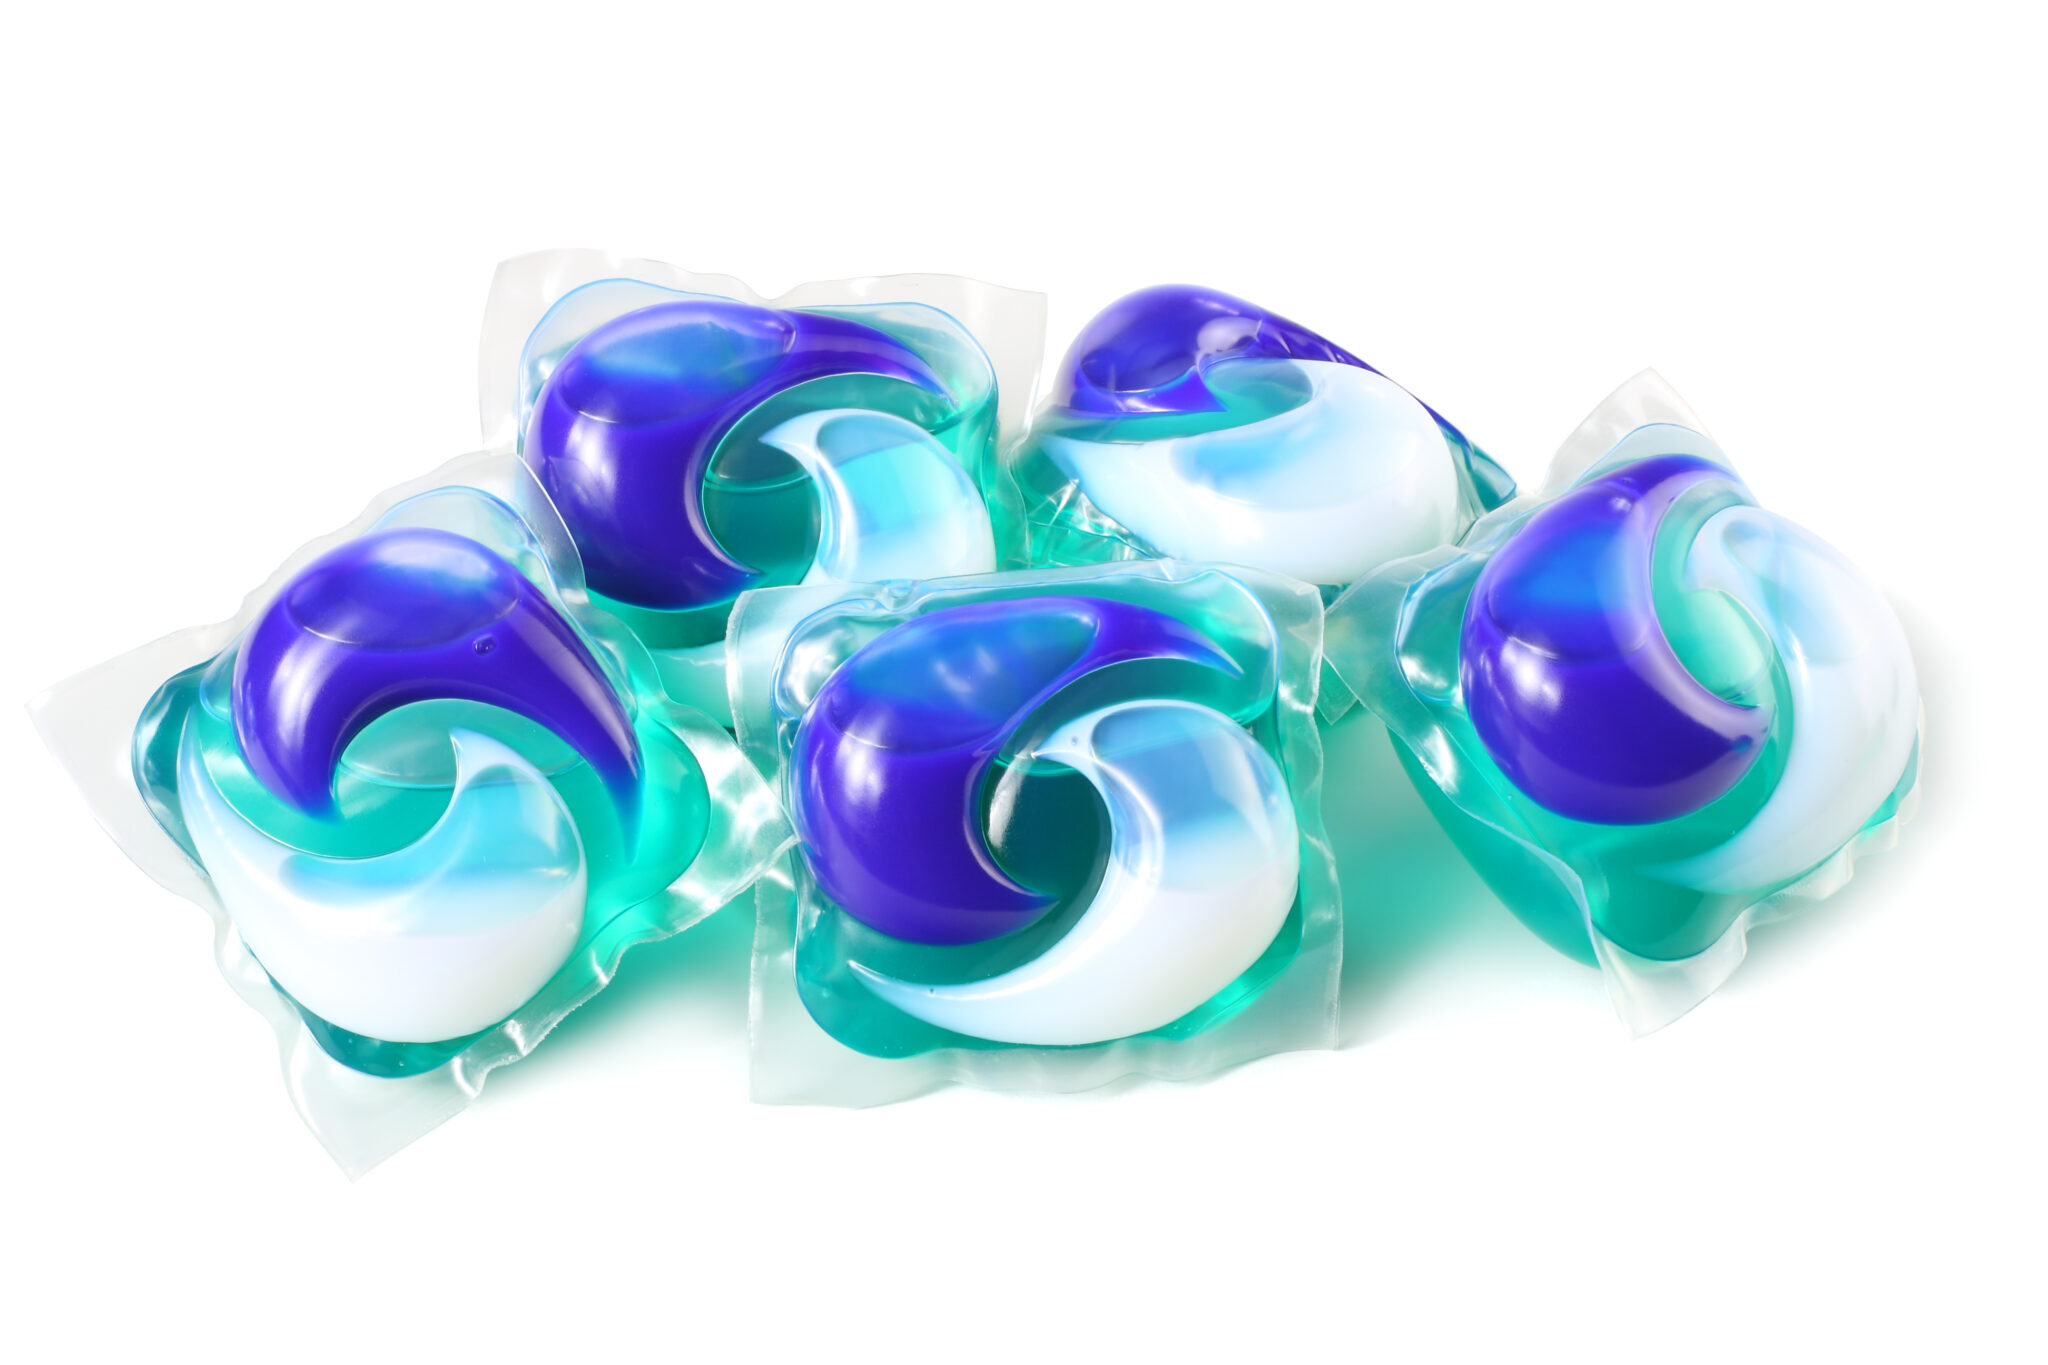 Dishwasher Pods You Can Make Yourself 3 2048x1365 